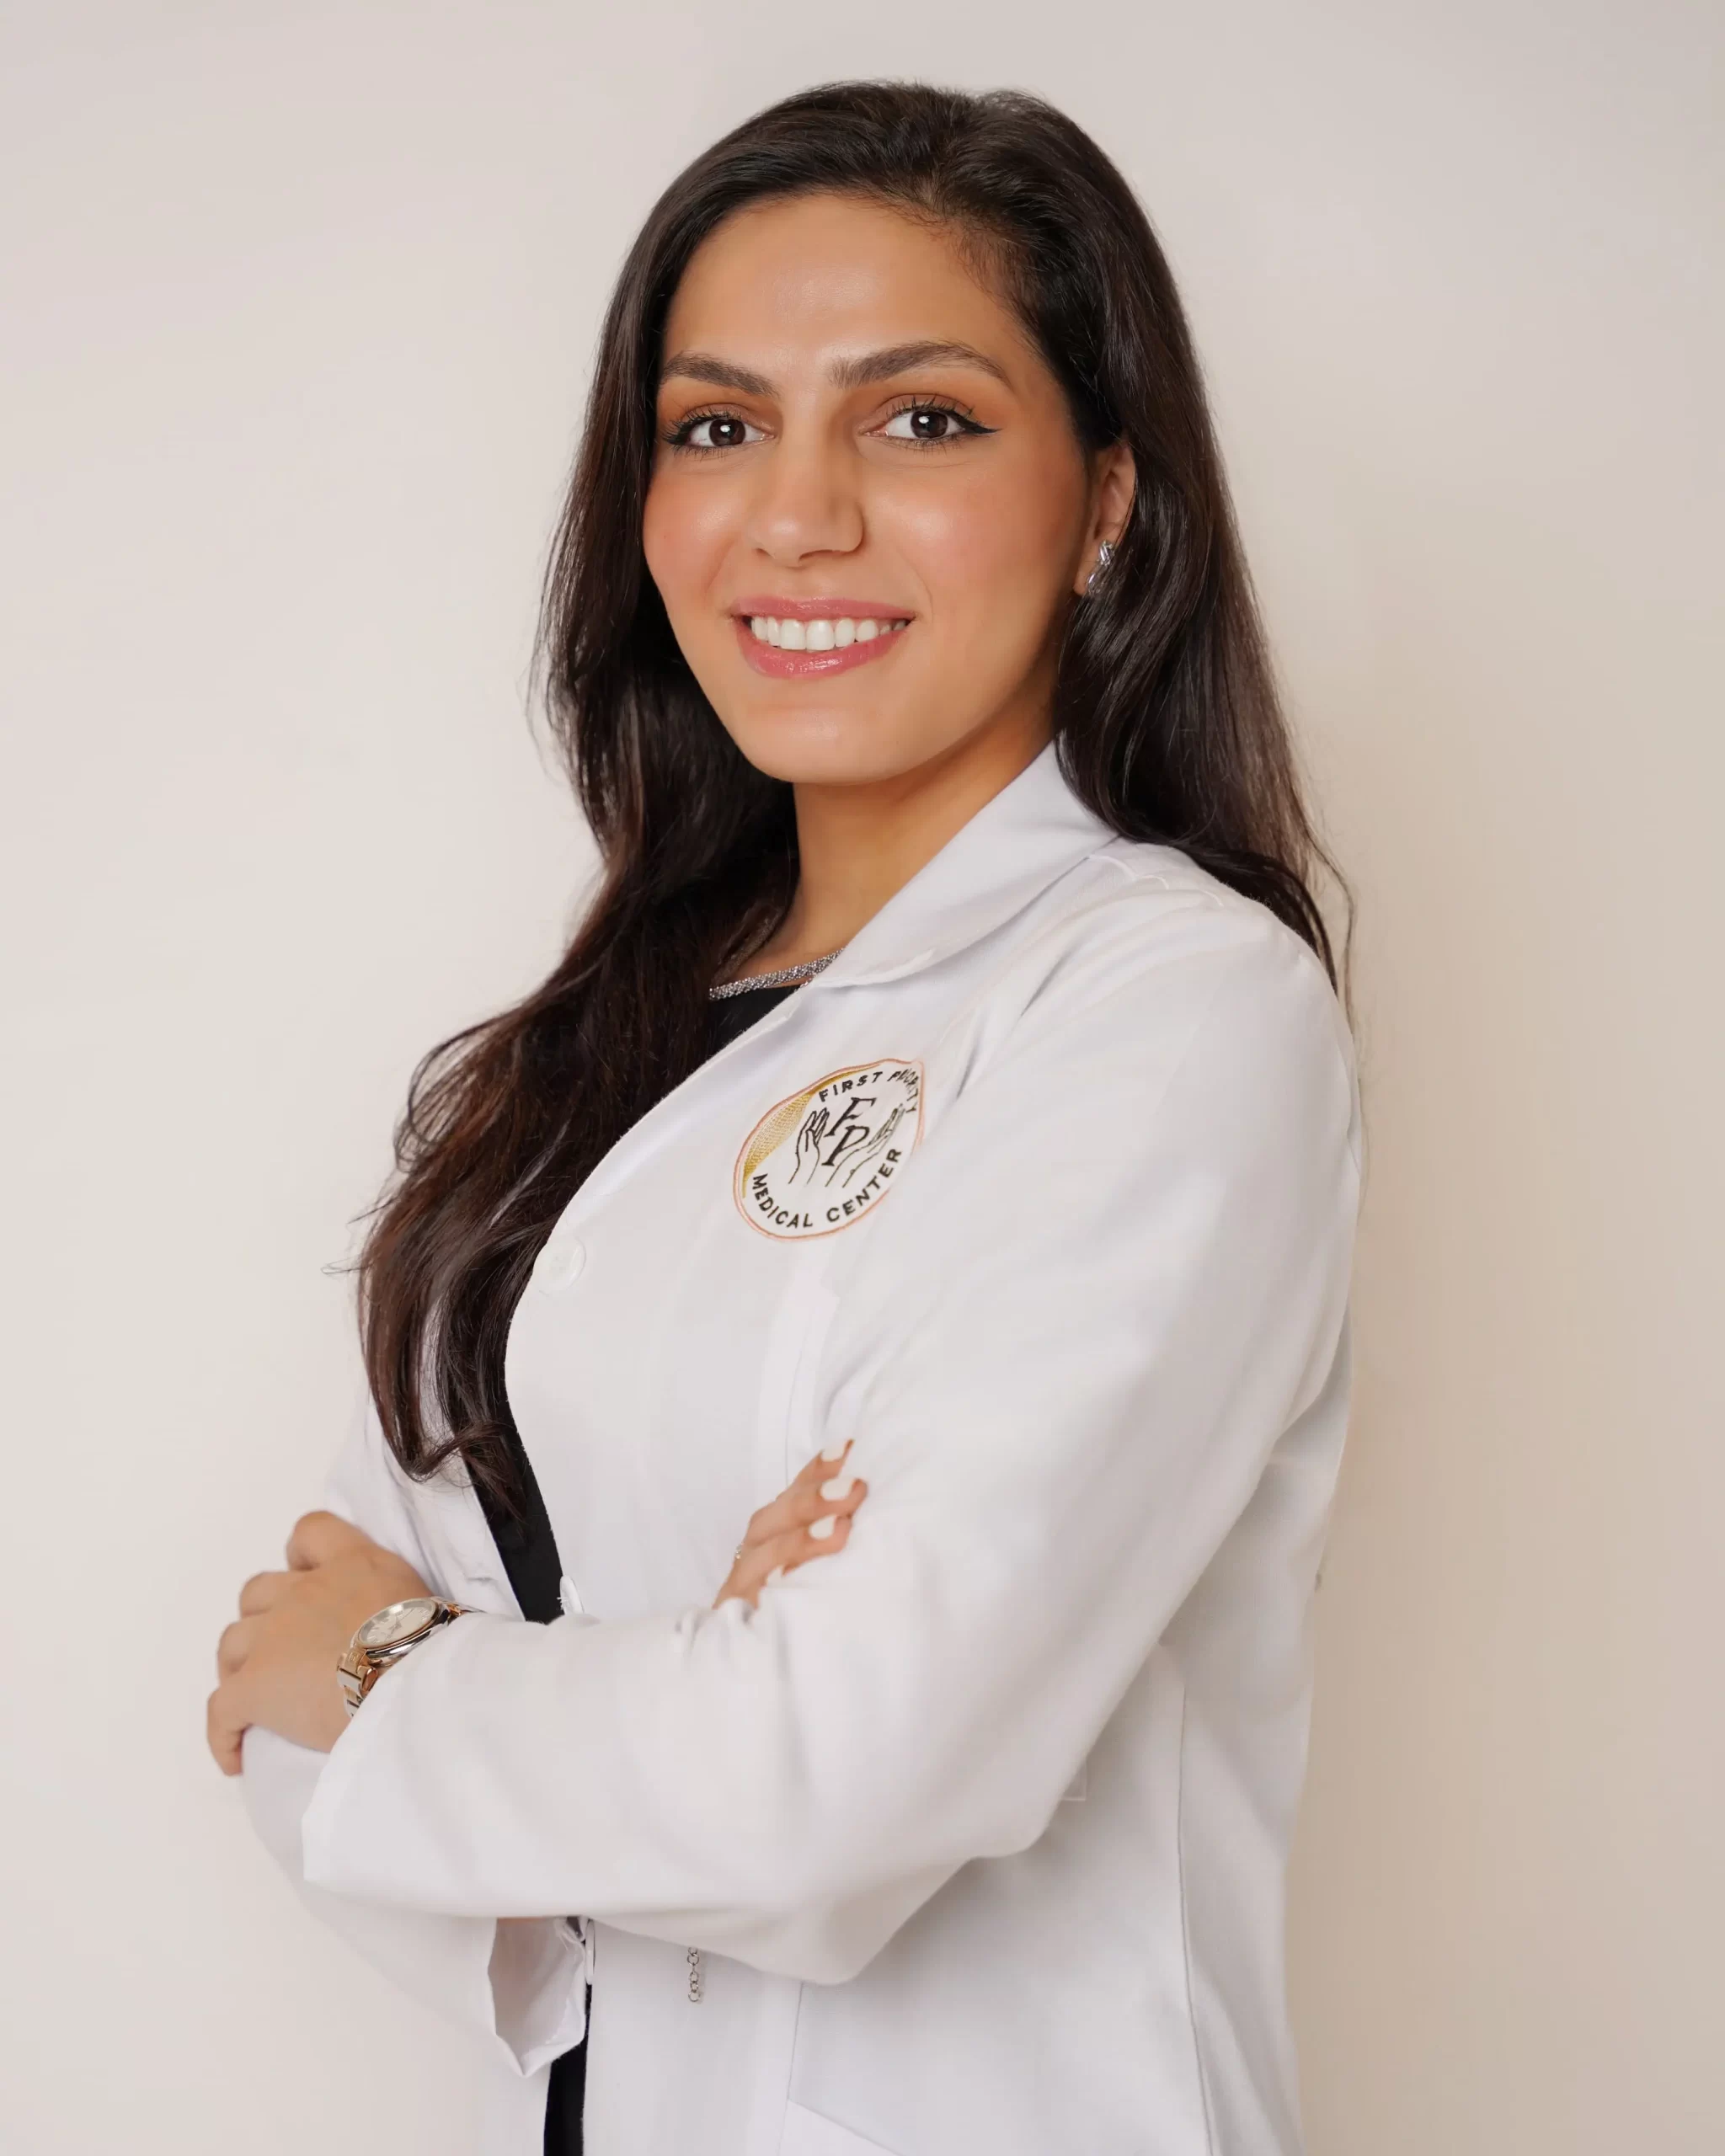 Dr. Yasmine, First Priority Medical Center.